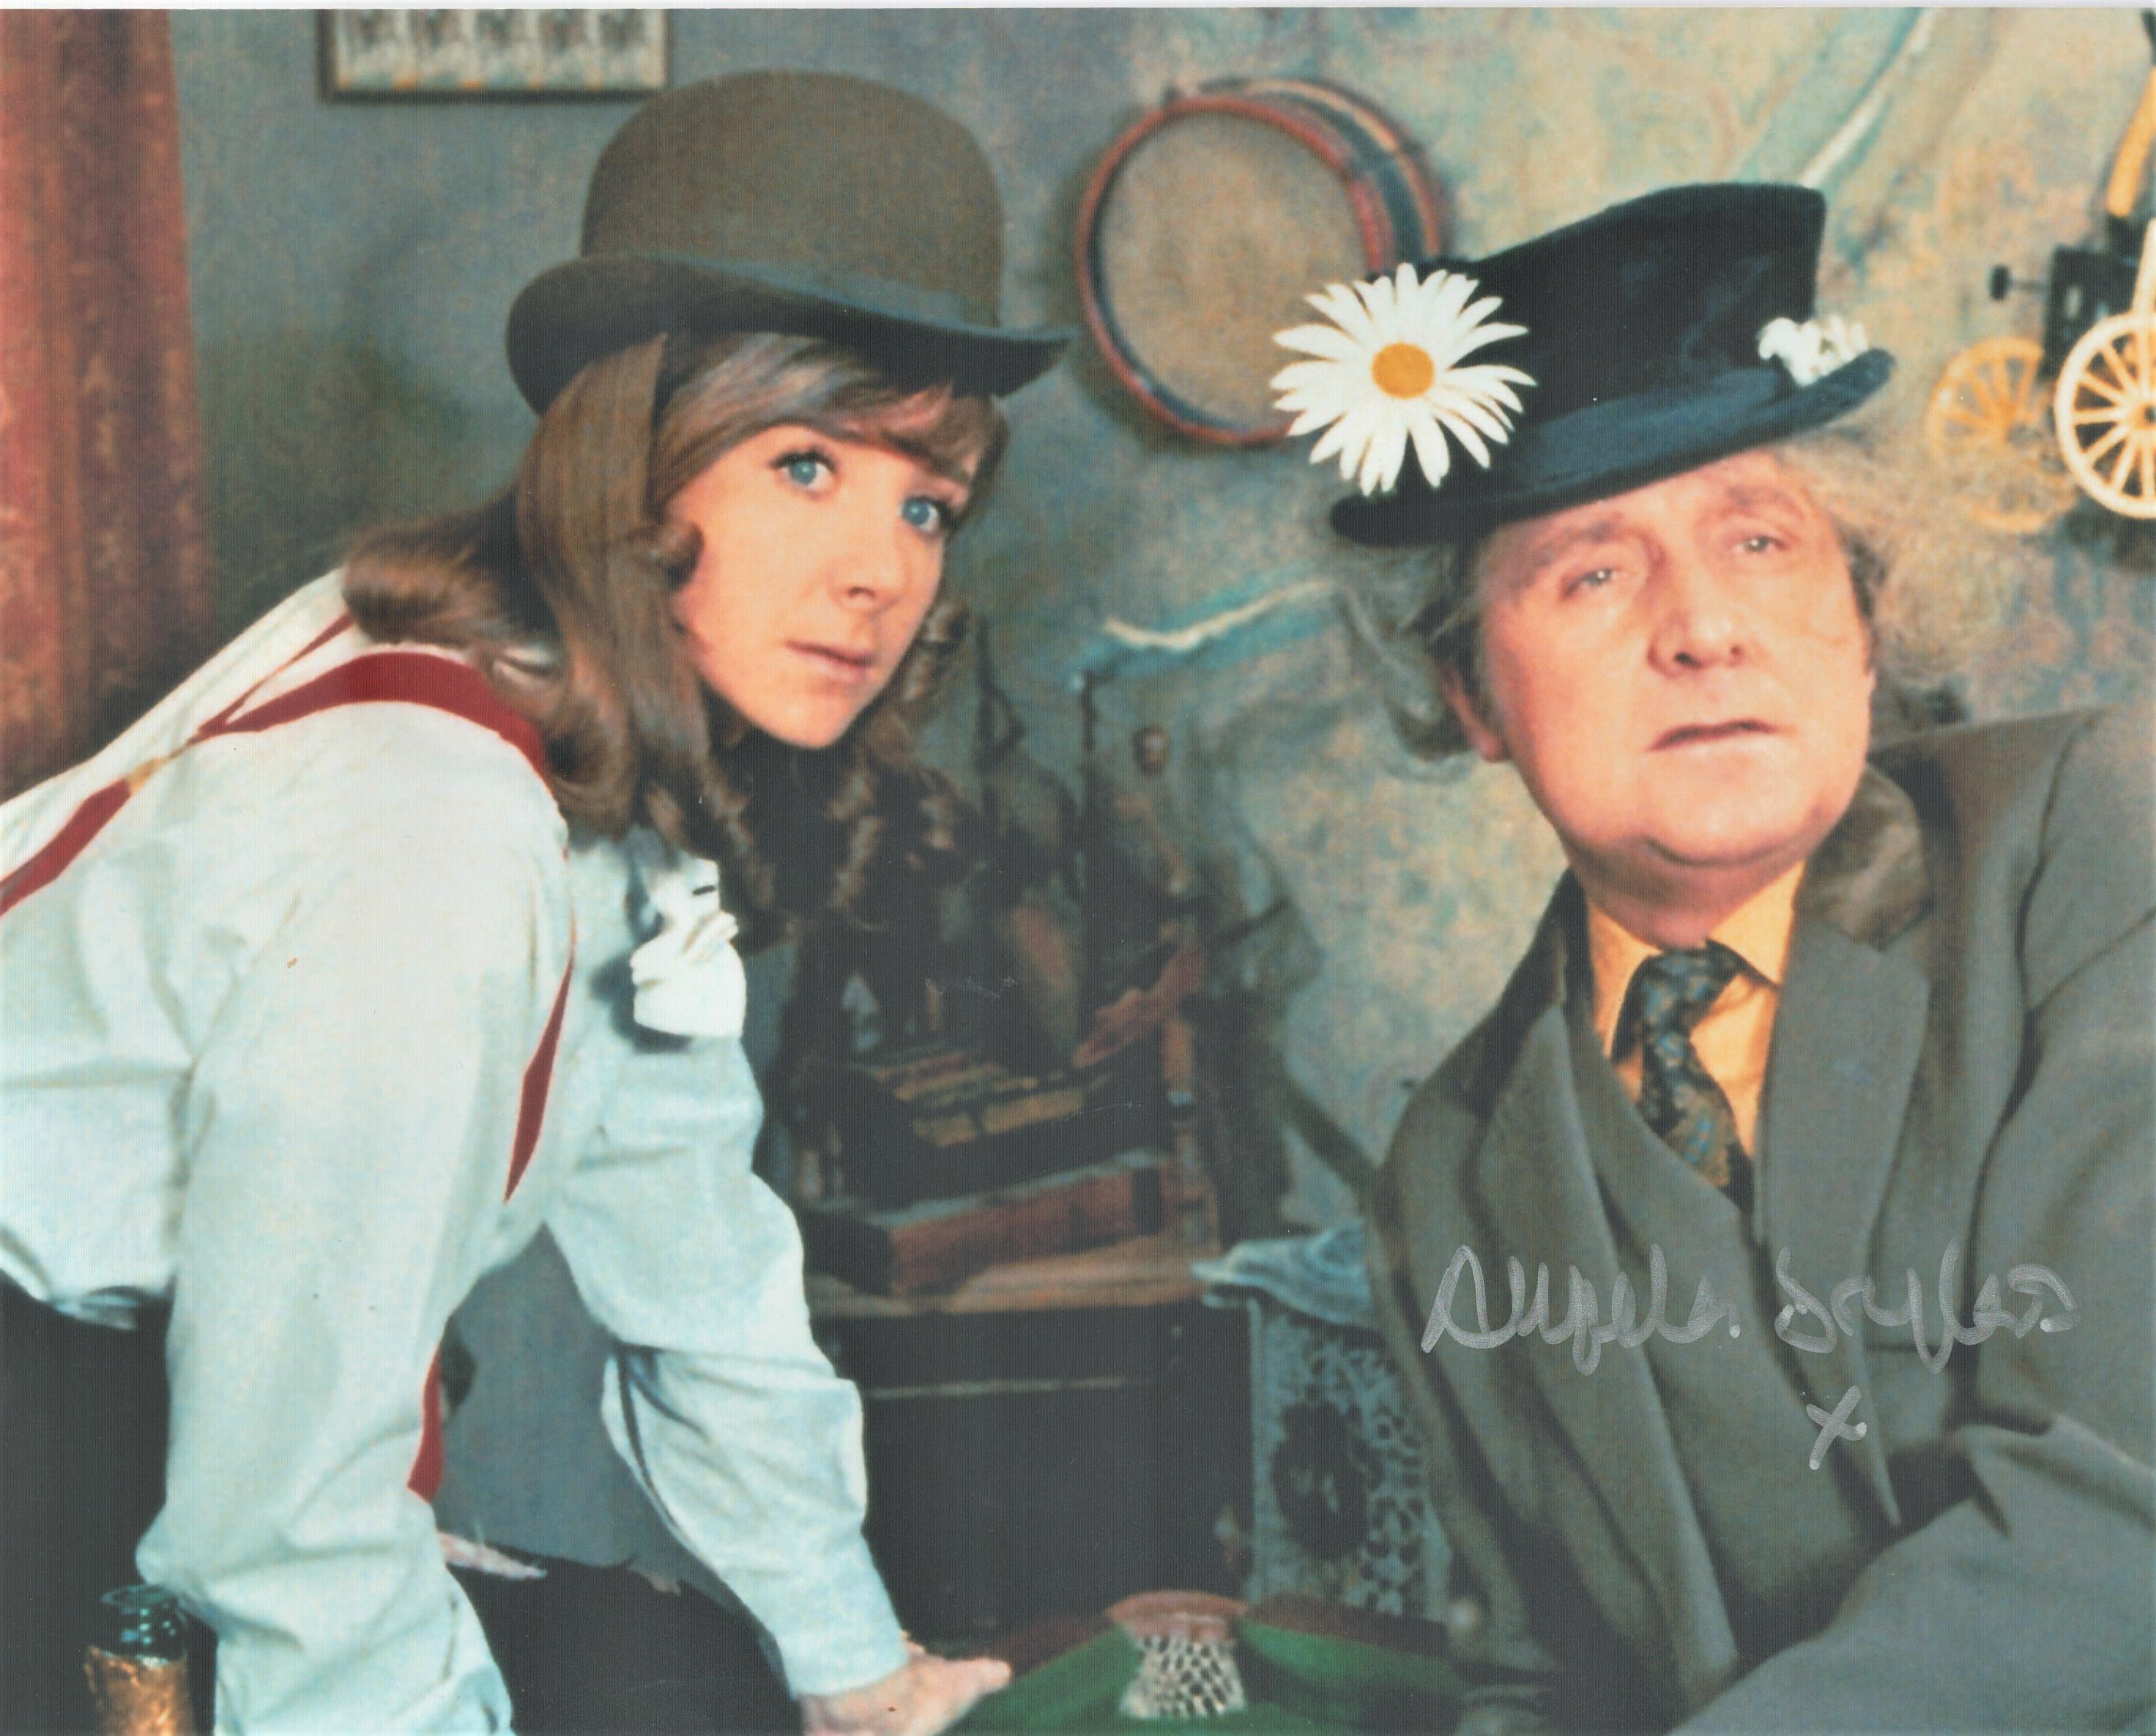 British Actress Angelica Douglas hand signed 10x8 Colour Photo. Signed in silver Marker Pen. Good